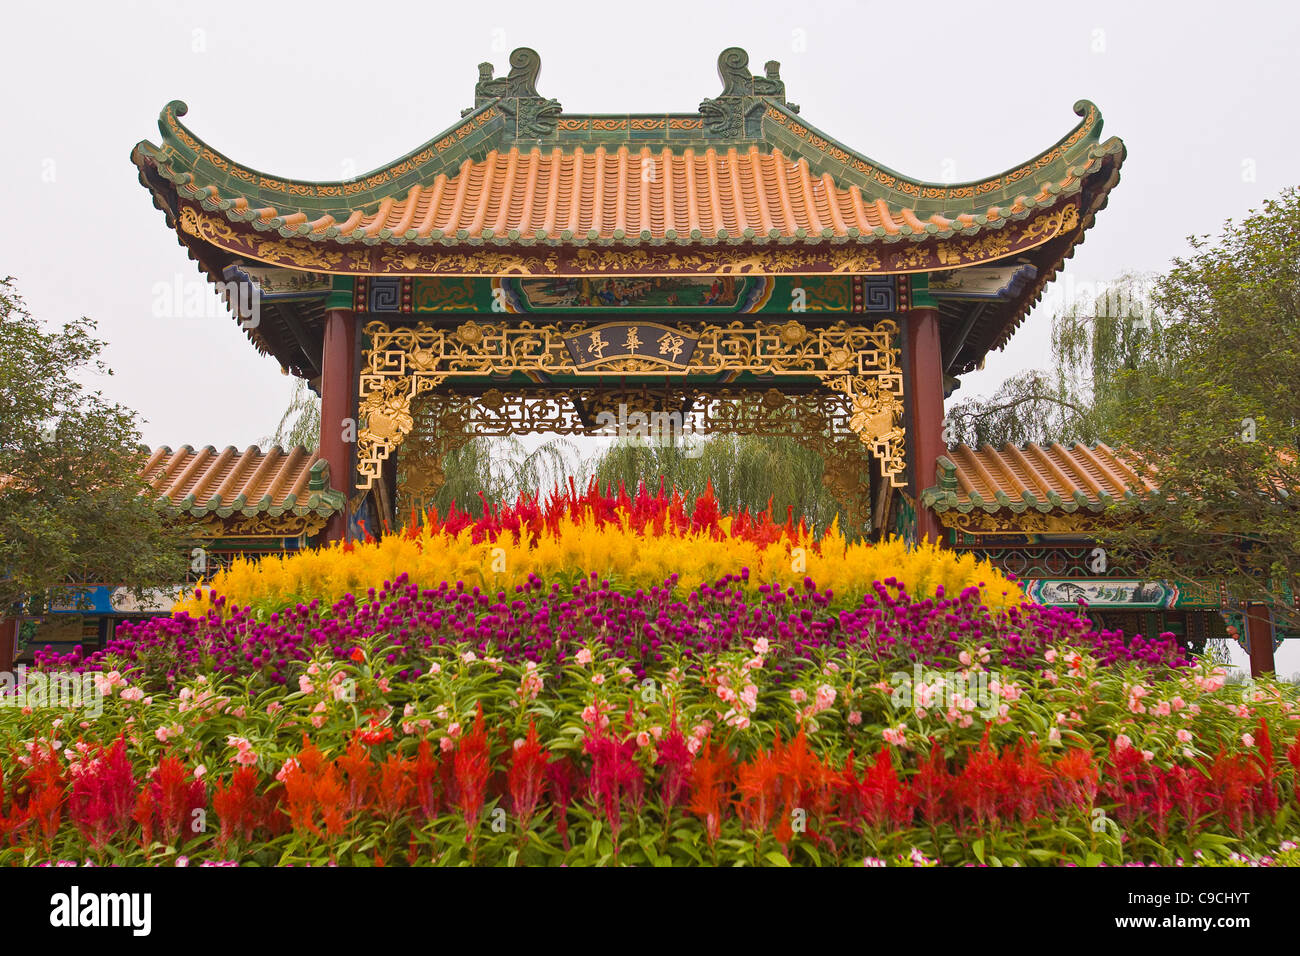 CHI LEI VILLAGE, PAN YU, GUANGDONG PROVINCE, CHINA - Flowers and building, in Baomo Park. Stock Photo